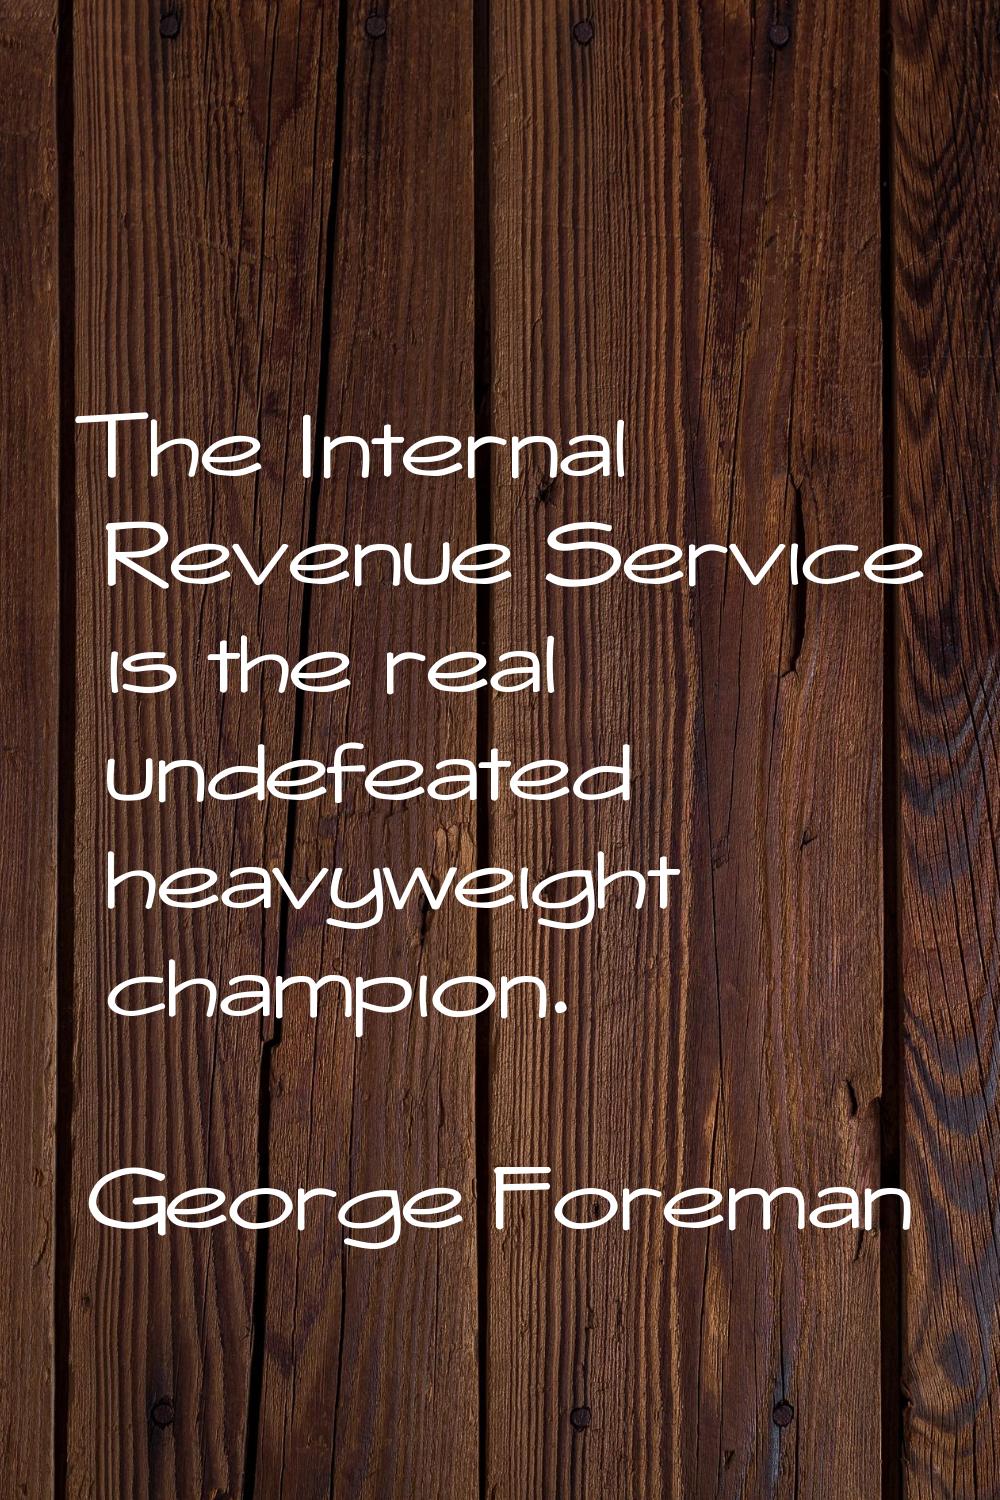 The Internal Revenue Service is the real undefeated heavyweight champion.